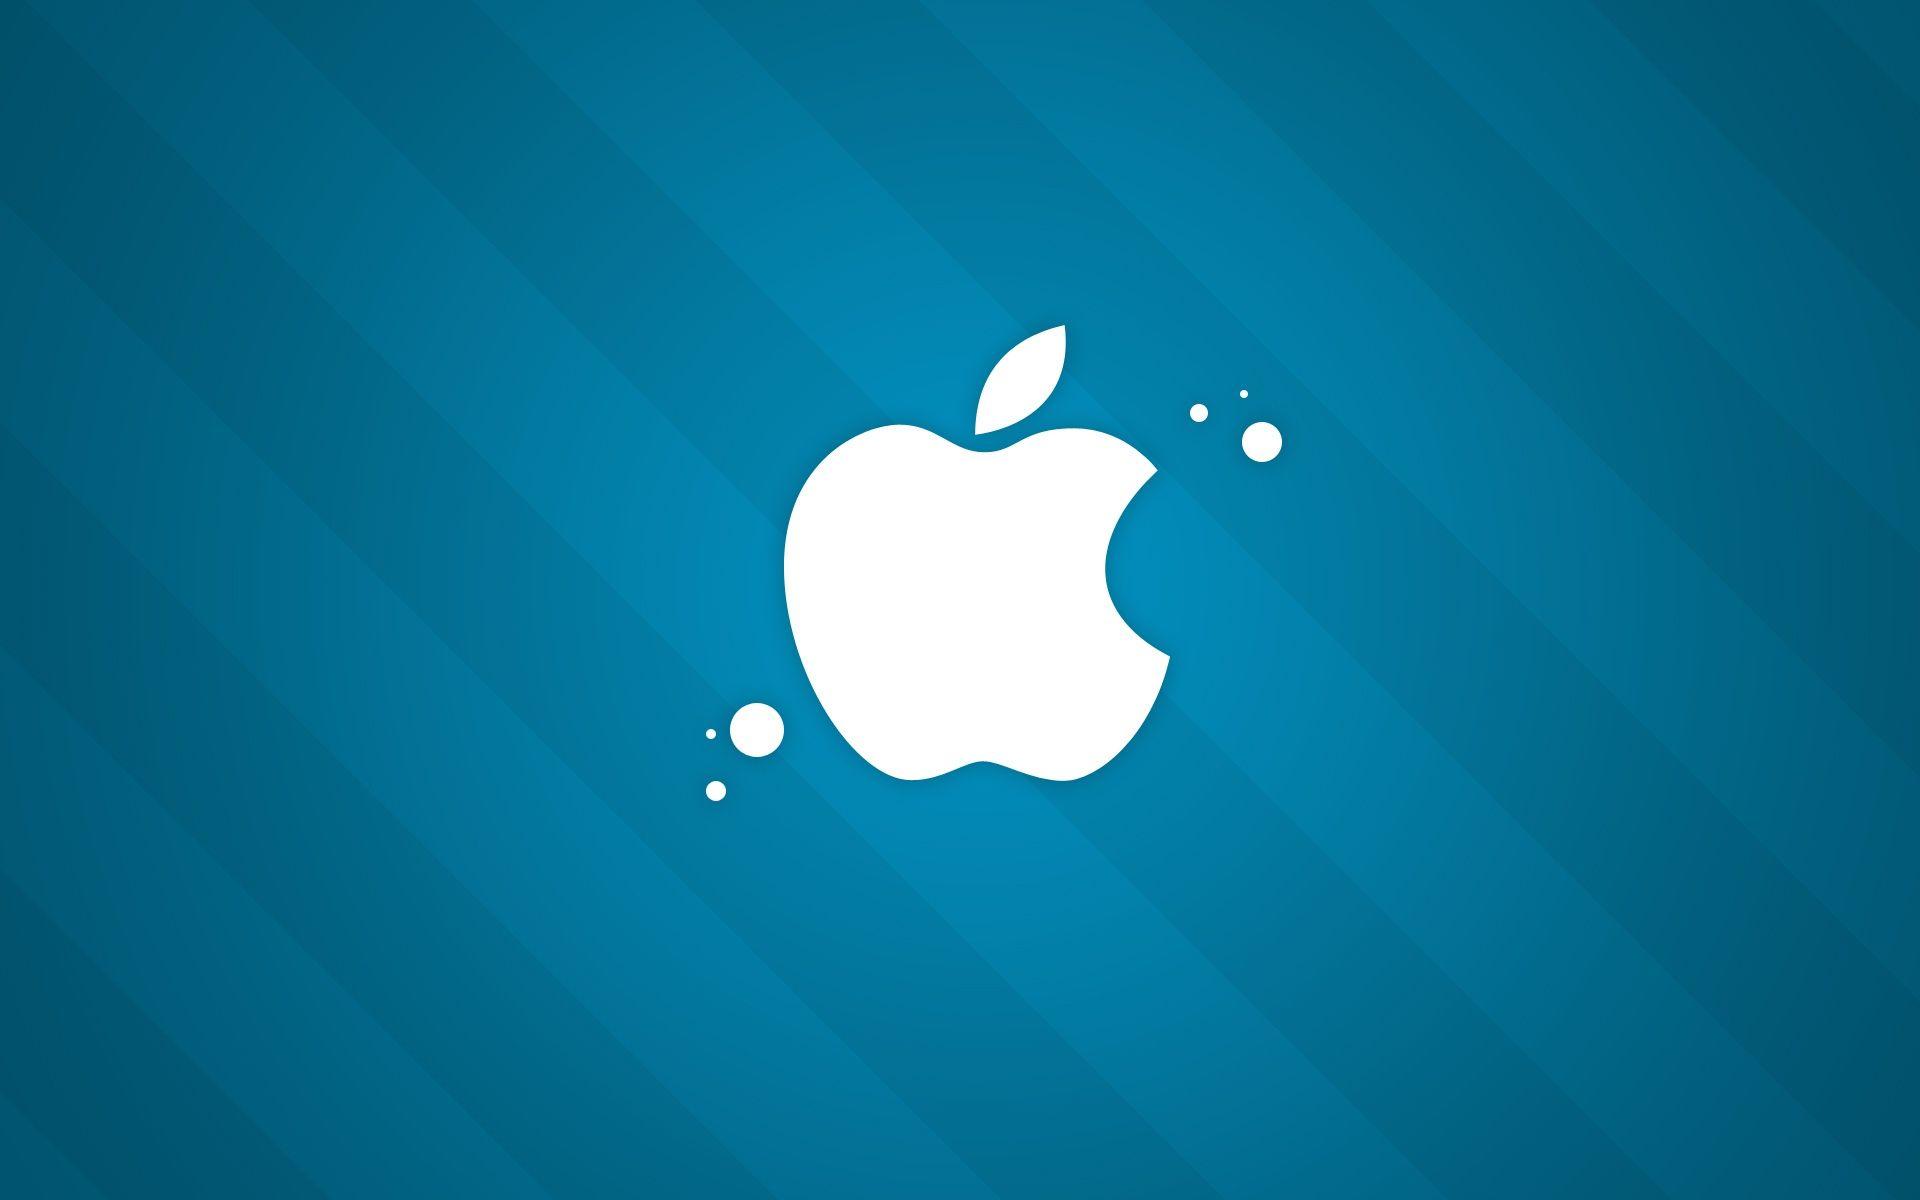 White And Blue Apple Wallpaper. TanukinoSippo